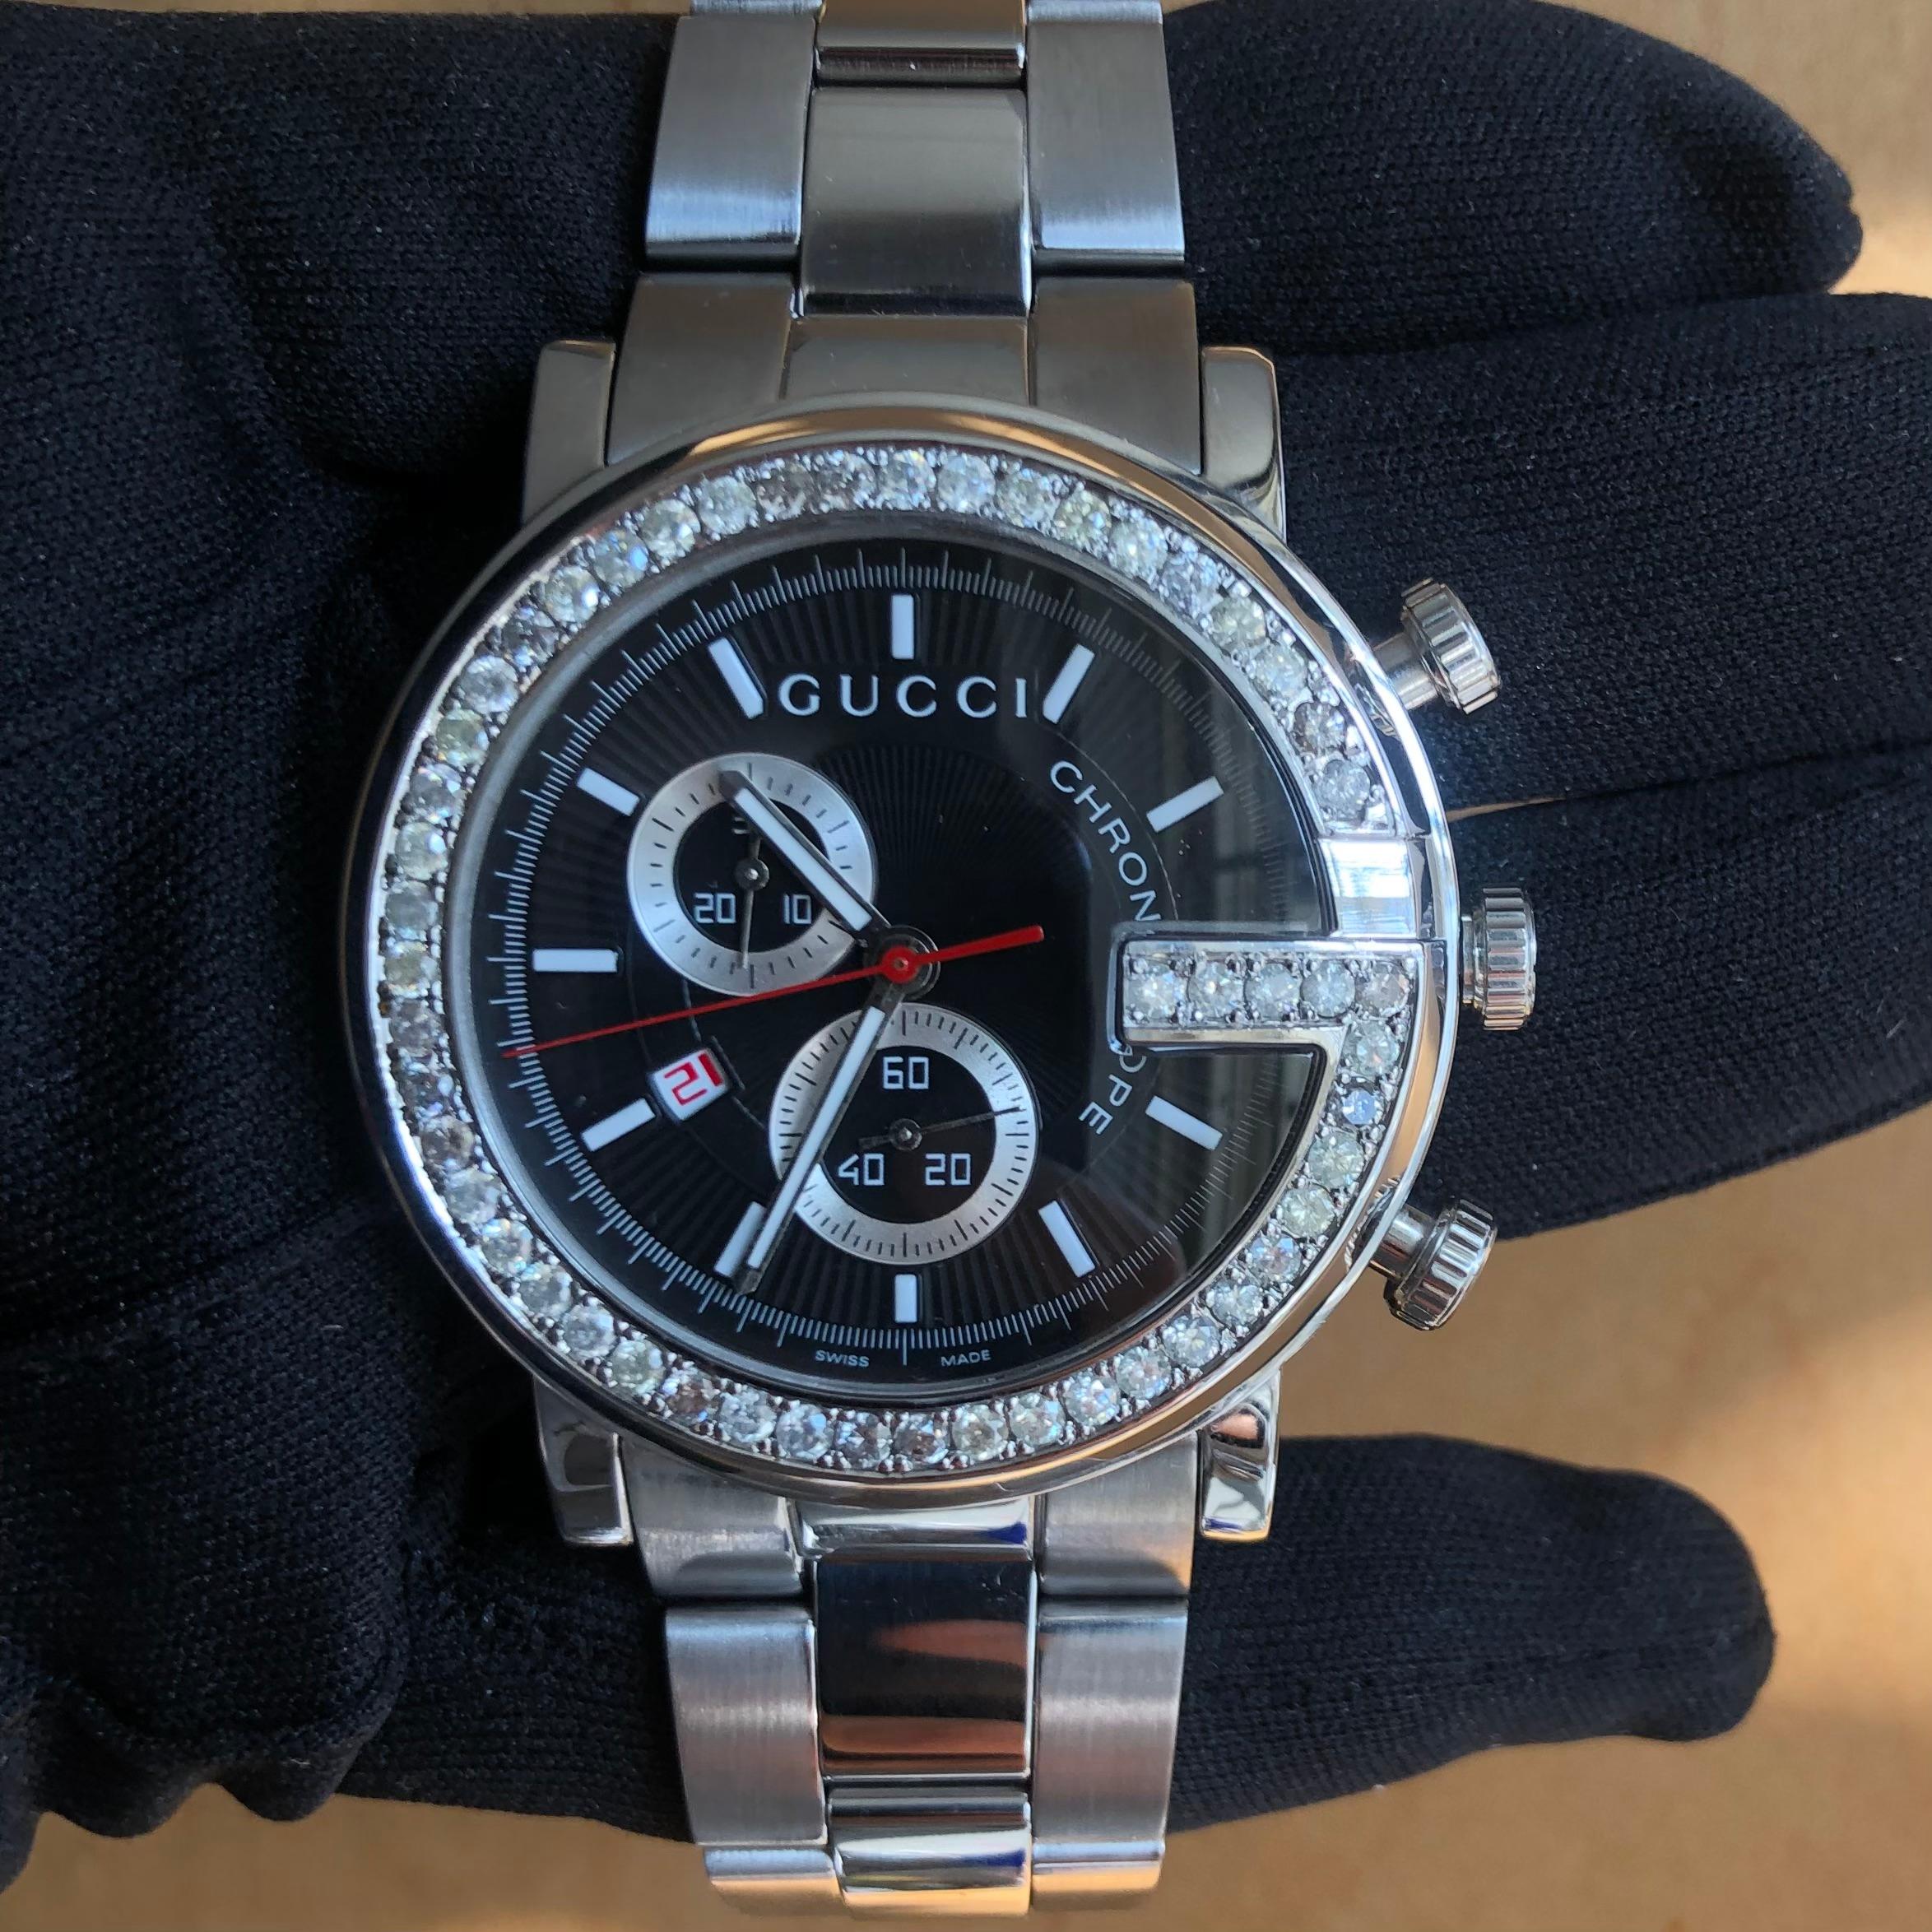 Custom Diamond Gucci 101M G Chrono Swiss Made Black-dial 44mm Watch with box and booklet papers.

Original Gucci Bezel customized hand-set with approx. 3.00 carats of natural genuine earth-mined SI-I Diamonds. The diamonds shine beautifully in the